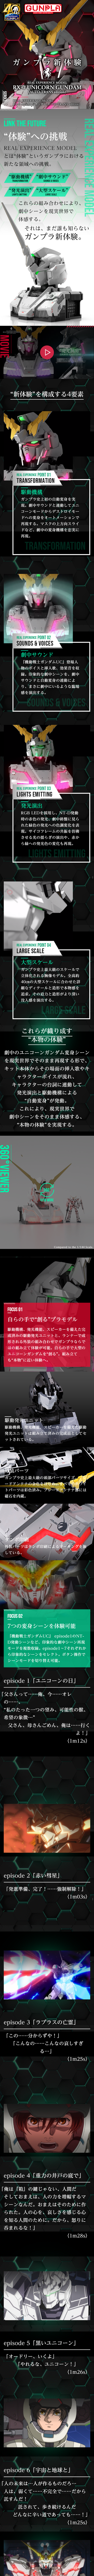 REAL EXPERIENCE MODEL RX-0 ユニコーンガンダム_sp_1